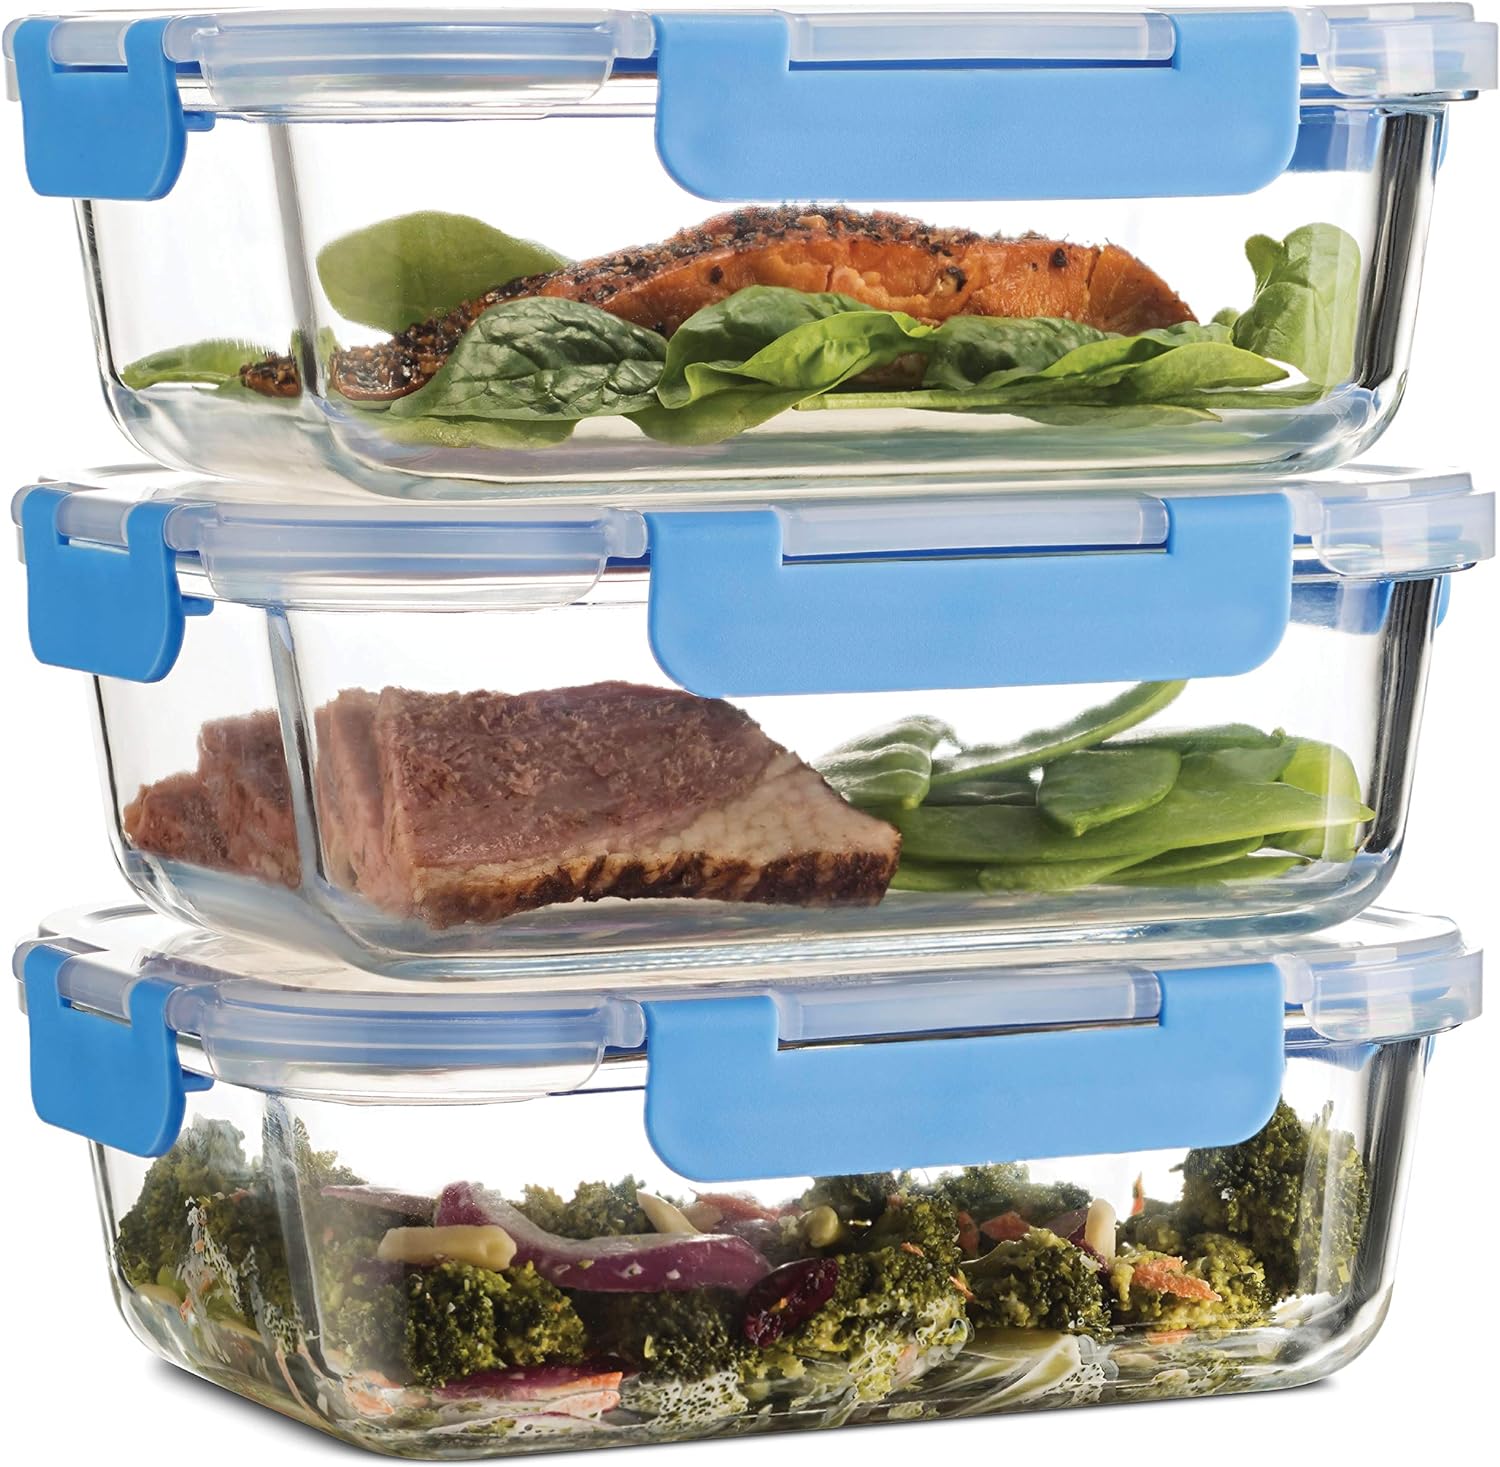 FineDine 6-Piece Superior Glass Food Storage Containers Set, 35oz Capacity - Newly Innovated Hinged Locking lids - 100% Leakproof Glass Meal-Prep Containers, Freezer-to-Oven-Safe (Blue)